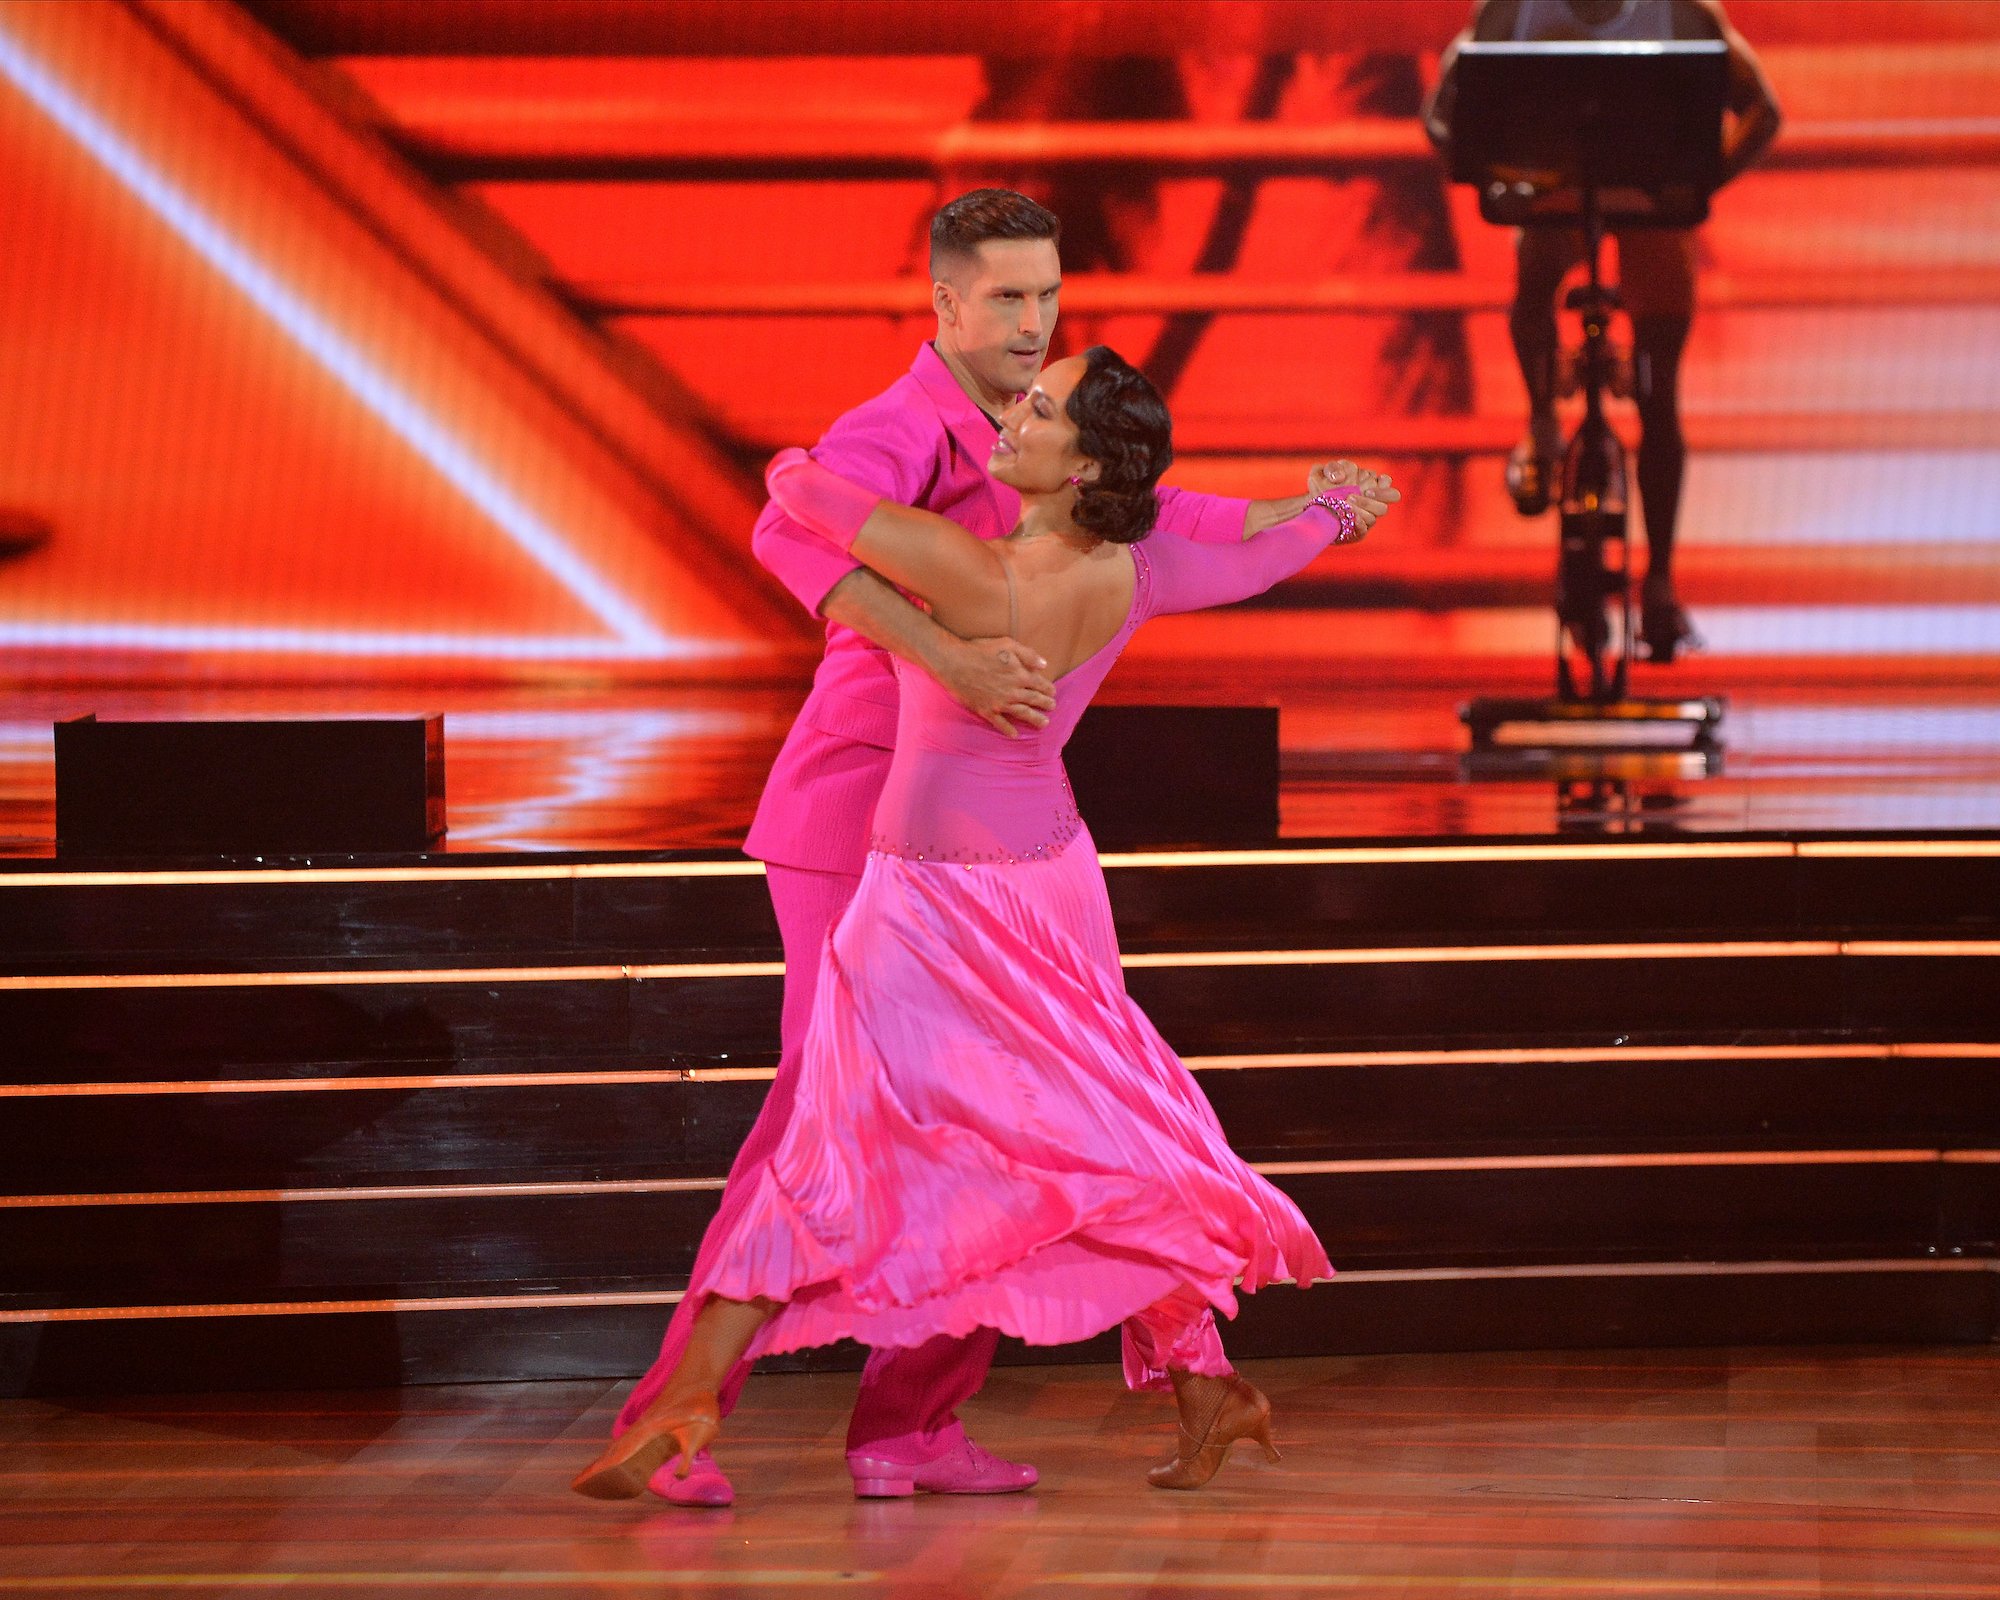 Cody Rigsby wearing a vibrant pink suit dancing a salsa with Cheryl Burke, who is wearing a hot pink dress, during week 1 of 'Dancing With the Stars' Season 30